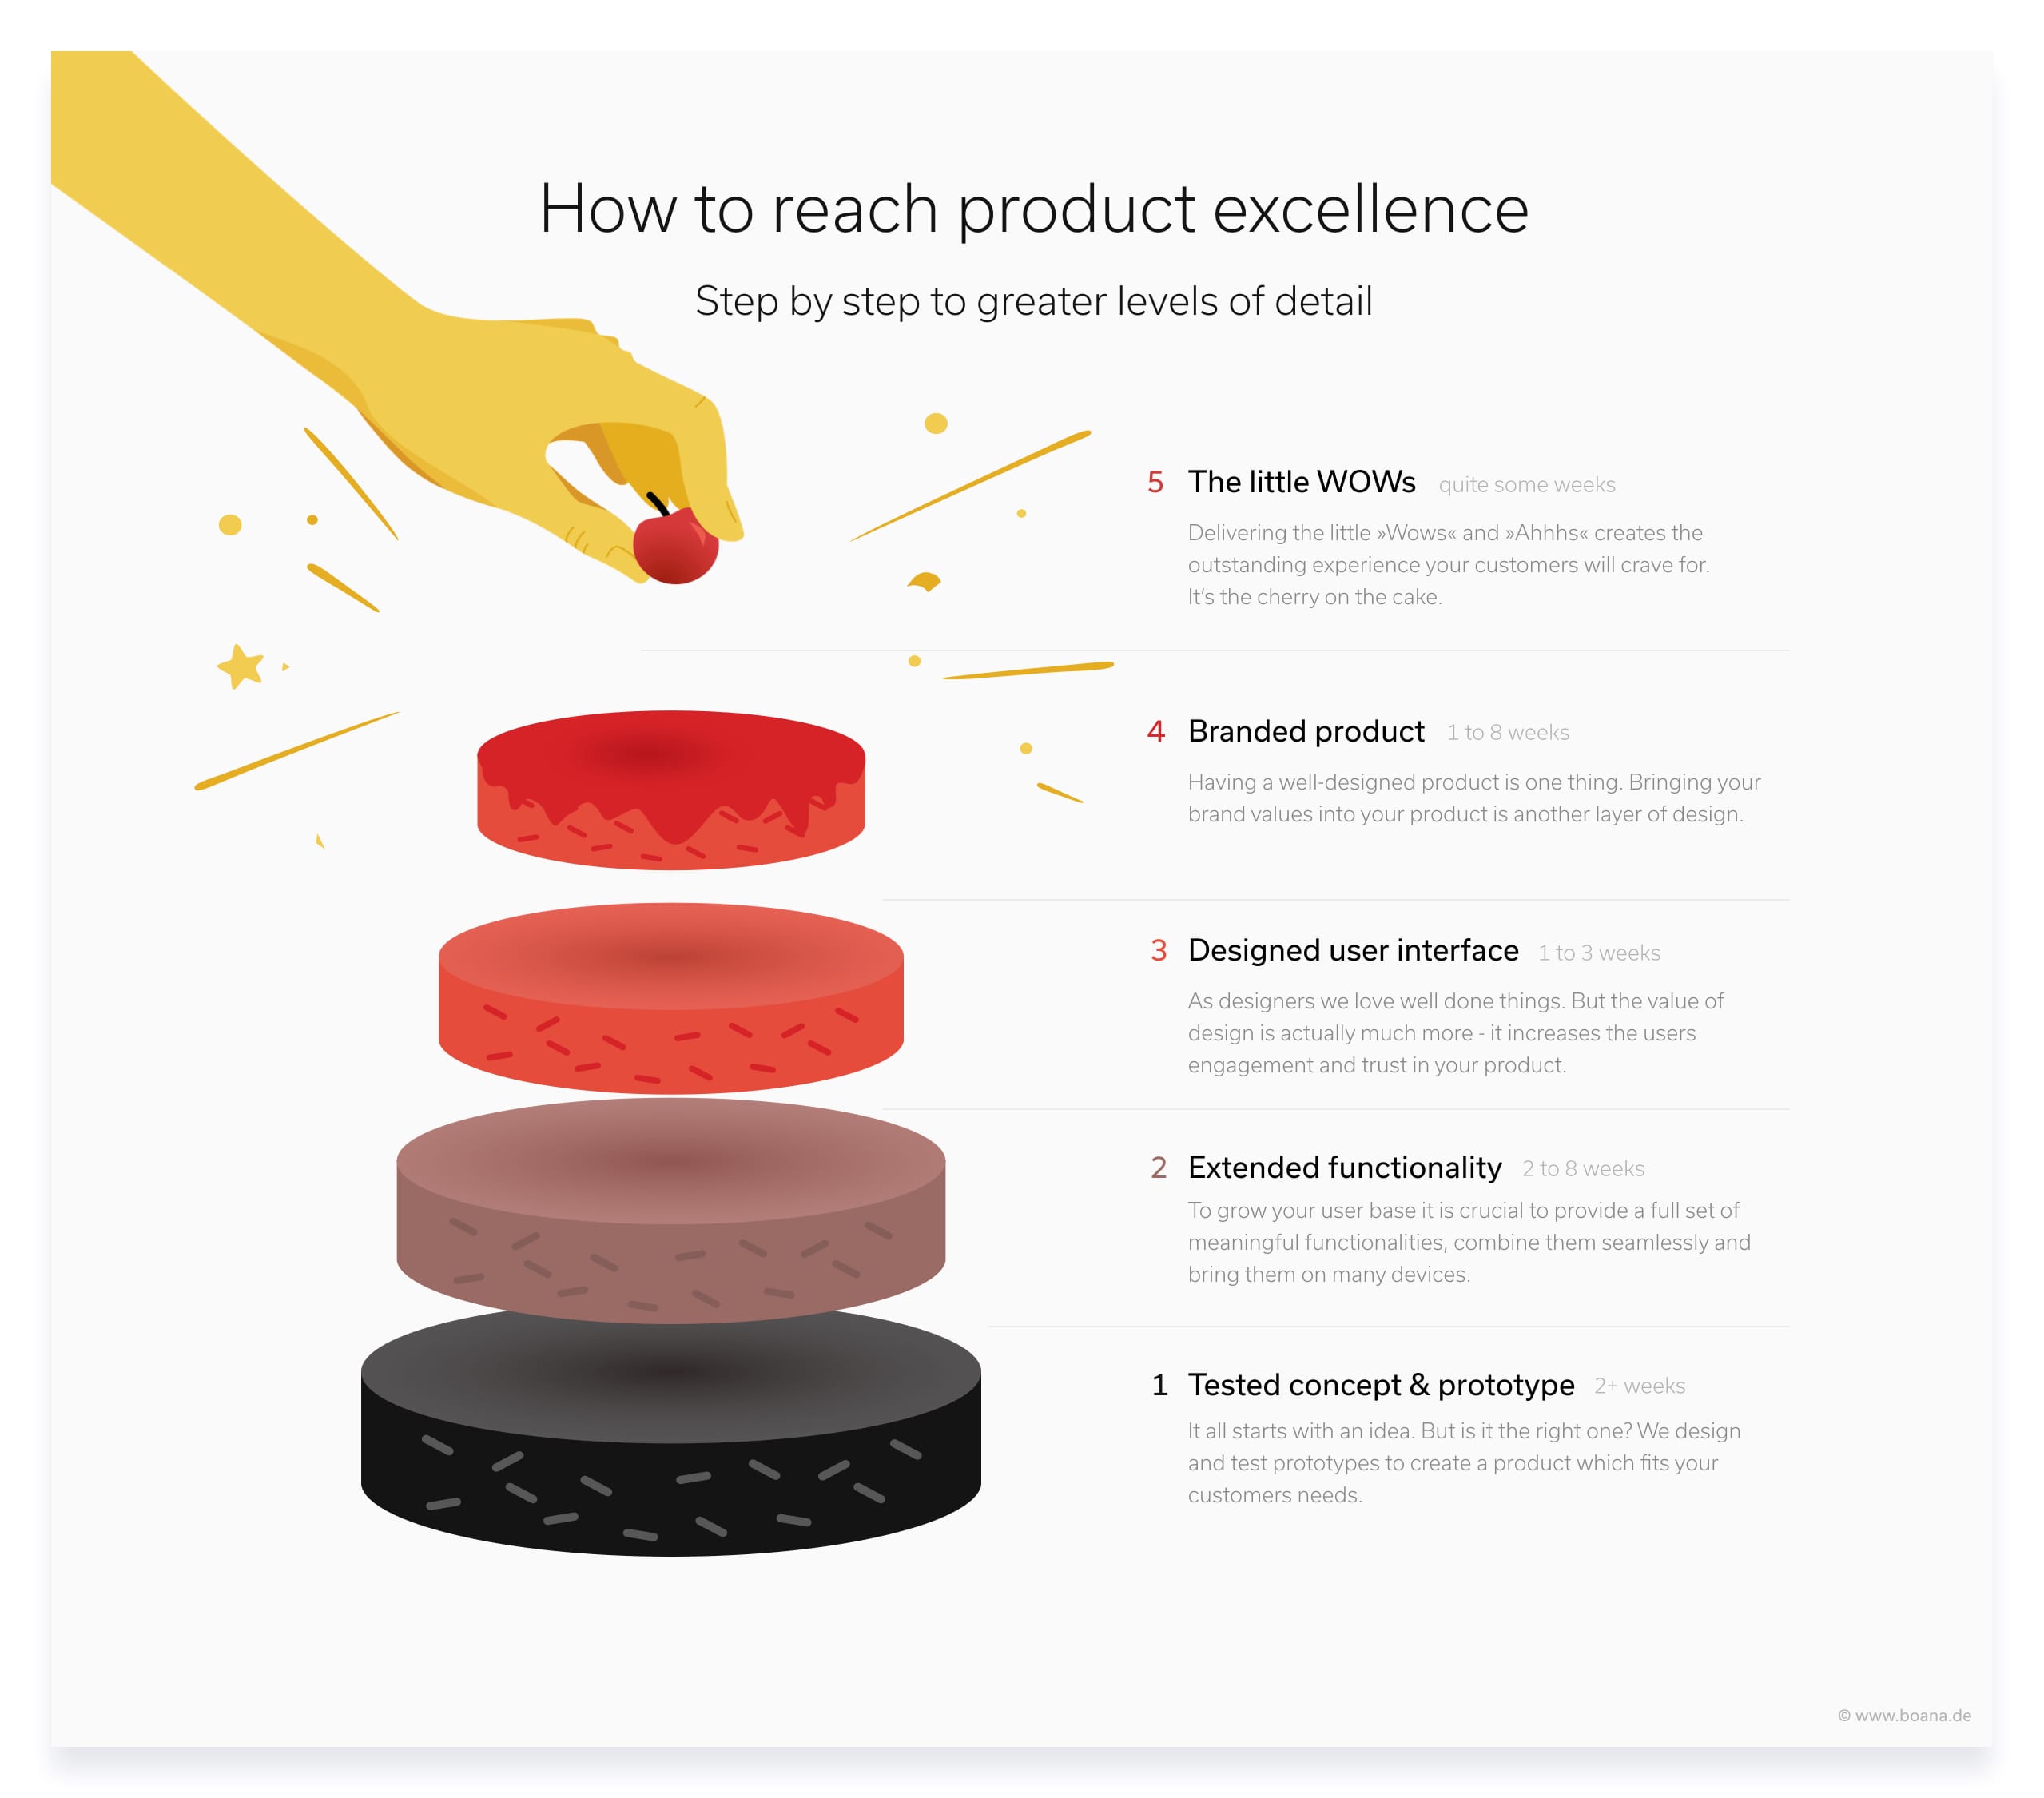 How to reach product excellence